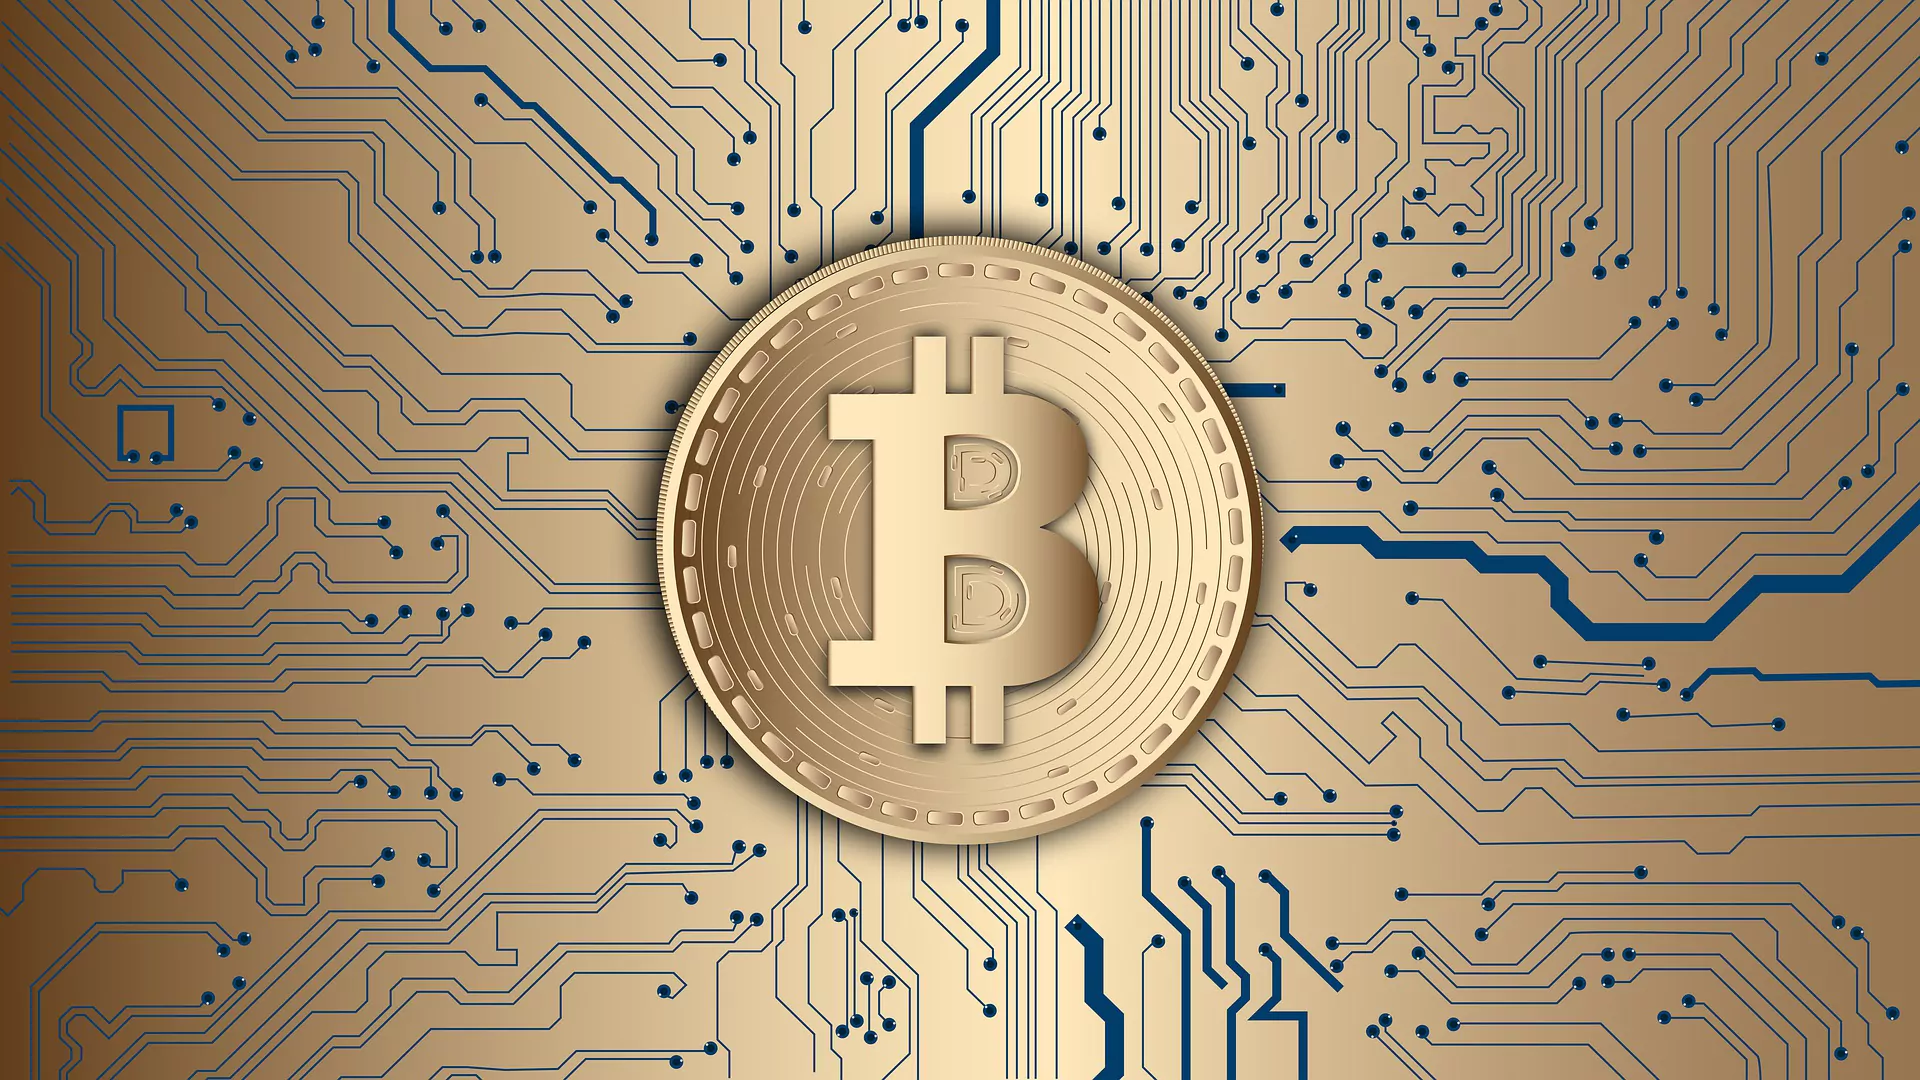 Cryptocurrency experts predict bitcoin’s growth to $ 270,000